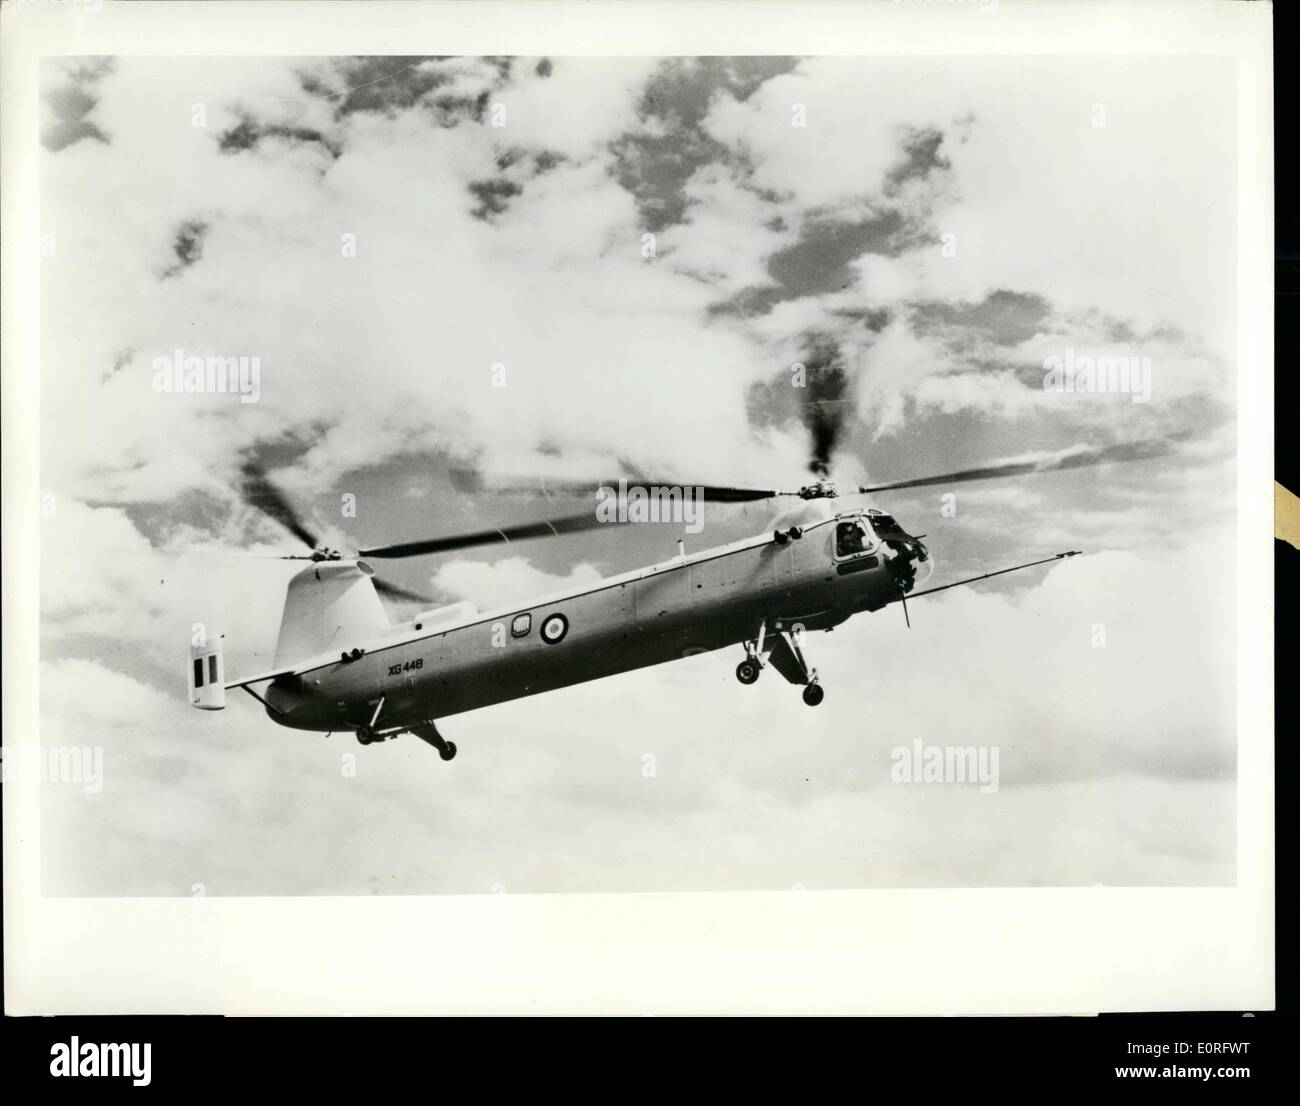 May 05, 1959 - Gas Turbine Helicopter to Join Air Force : Next year the Bristol 192 twin - engined tandem-rotor gas turbine helicopter will enter service with Britain's Royal Air Force. 54 ft. 4 ins. in overall length, Europe's largest, it has been designed to meet military requirements in troop and freight transport, search and rescue operations and ambulance and supply-dropping work, On short hauls it can carry 25 men. Its freight capacity is a maximum concentrated load of 4,000 lbs. or a distributed one of 6,000 lbs Stock Photo